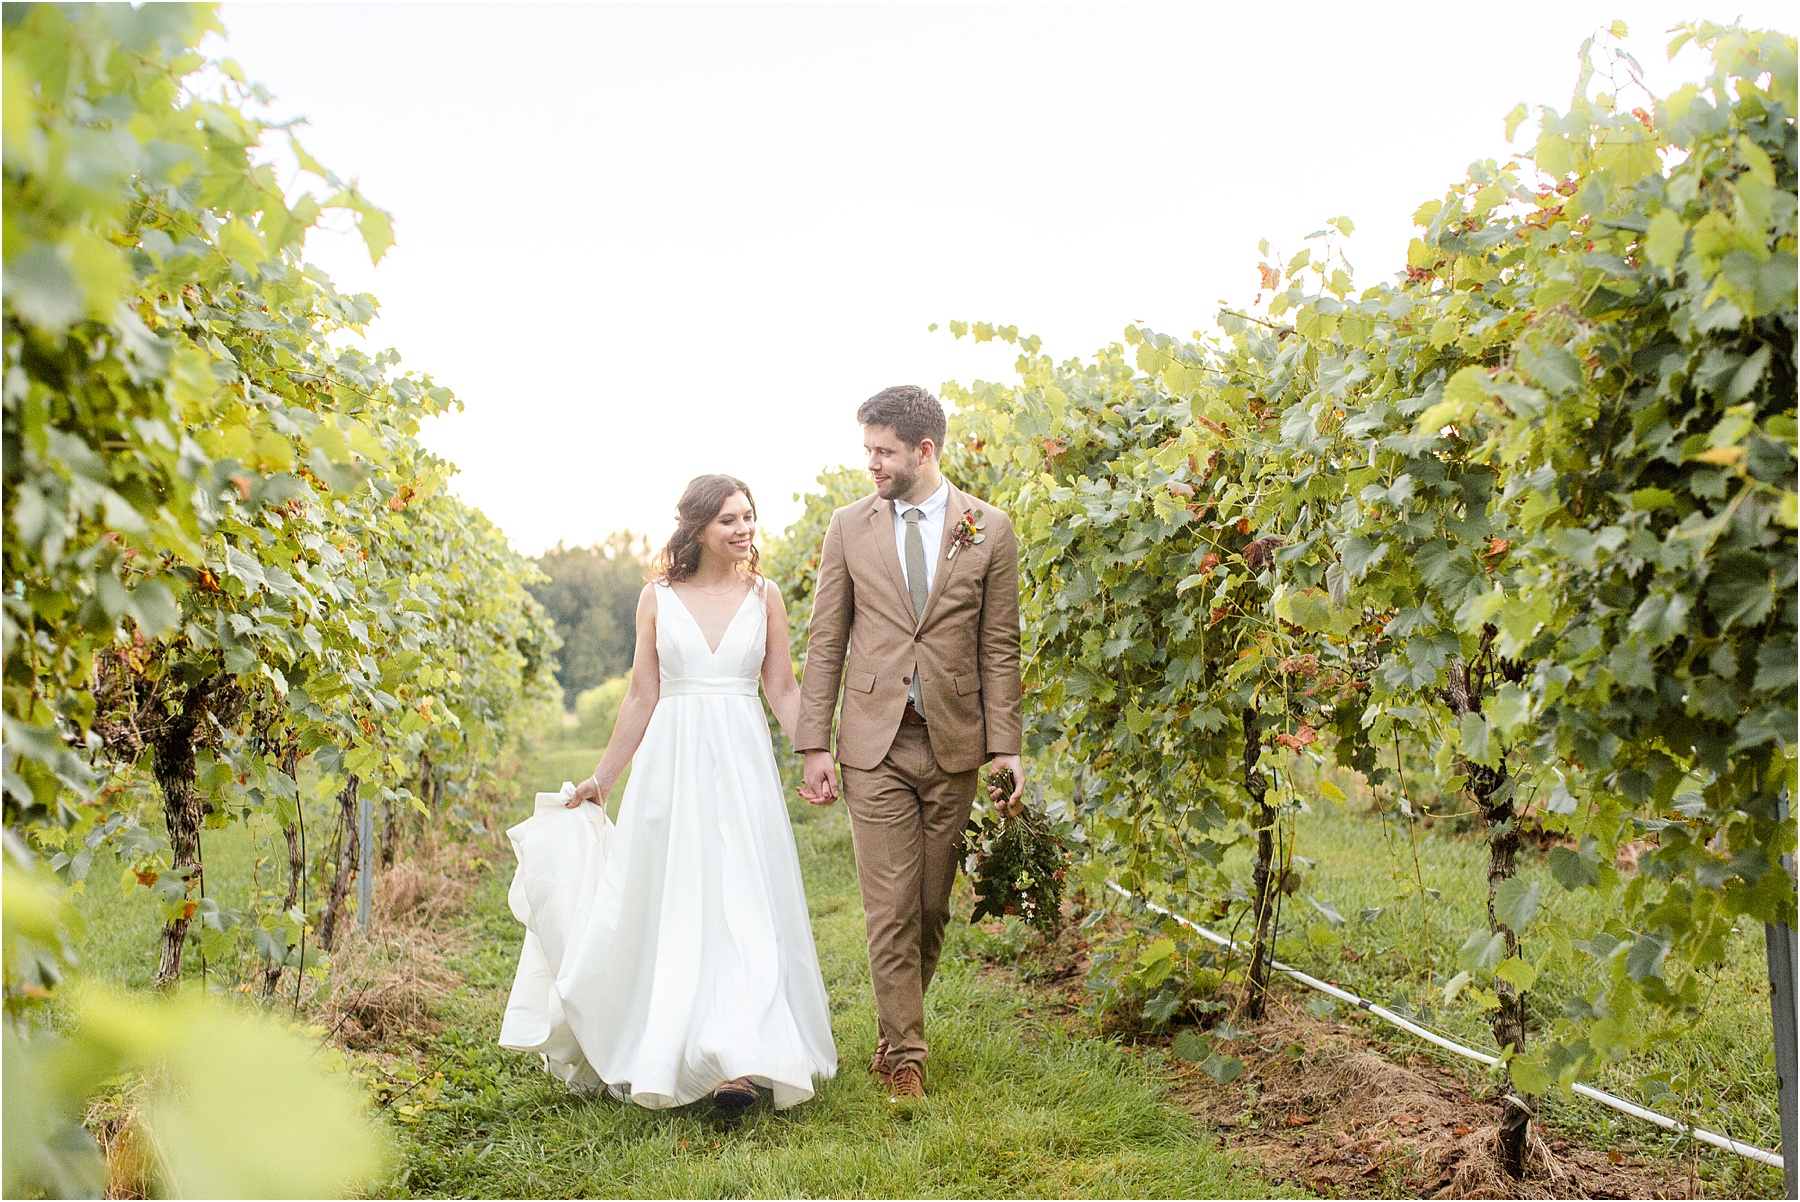 Married couple walking in wedding clothes through vineyards